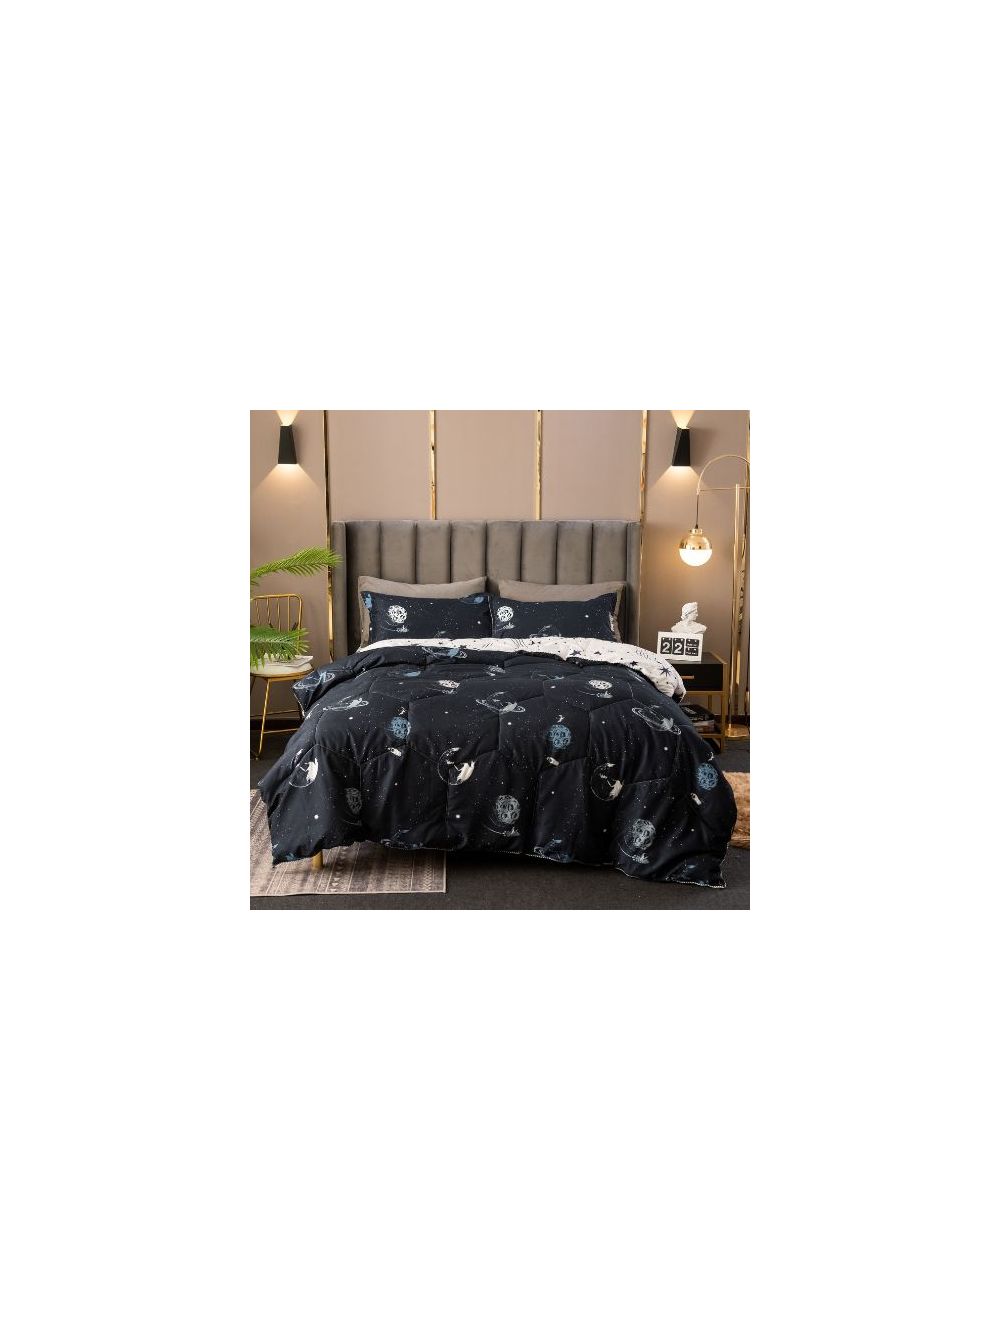 DEALS FOR LESS - Comforter Set Of 4 Pieces, Galaxy Design.-cft33-01